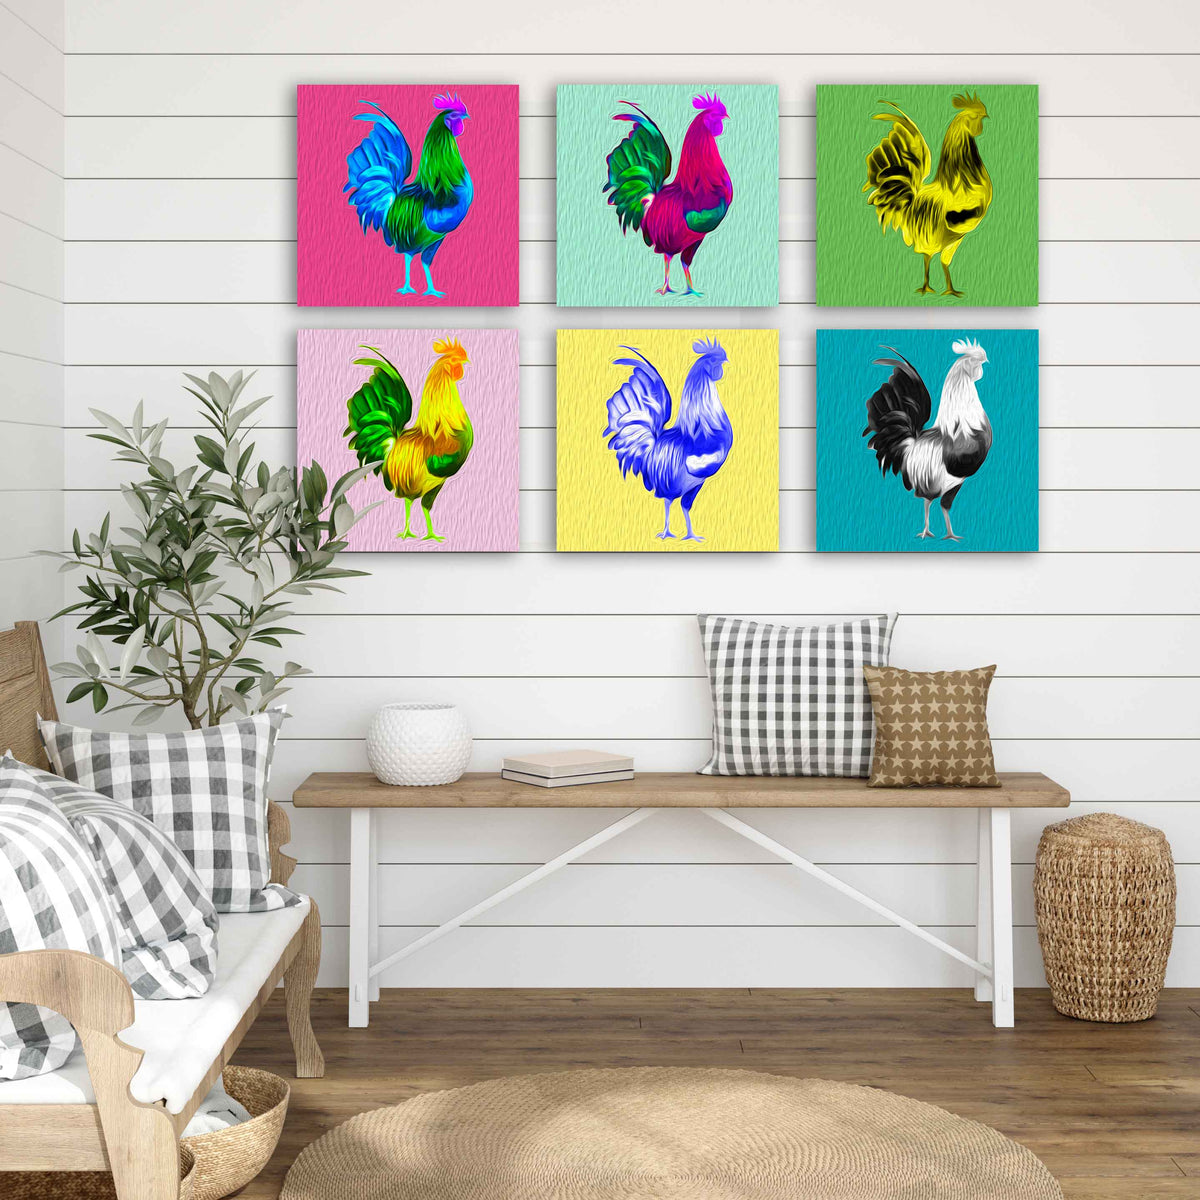 Warhol Rooster VI (limited to 10)